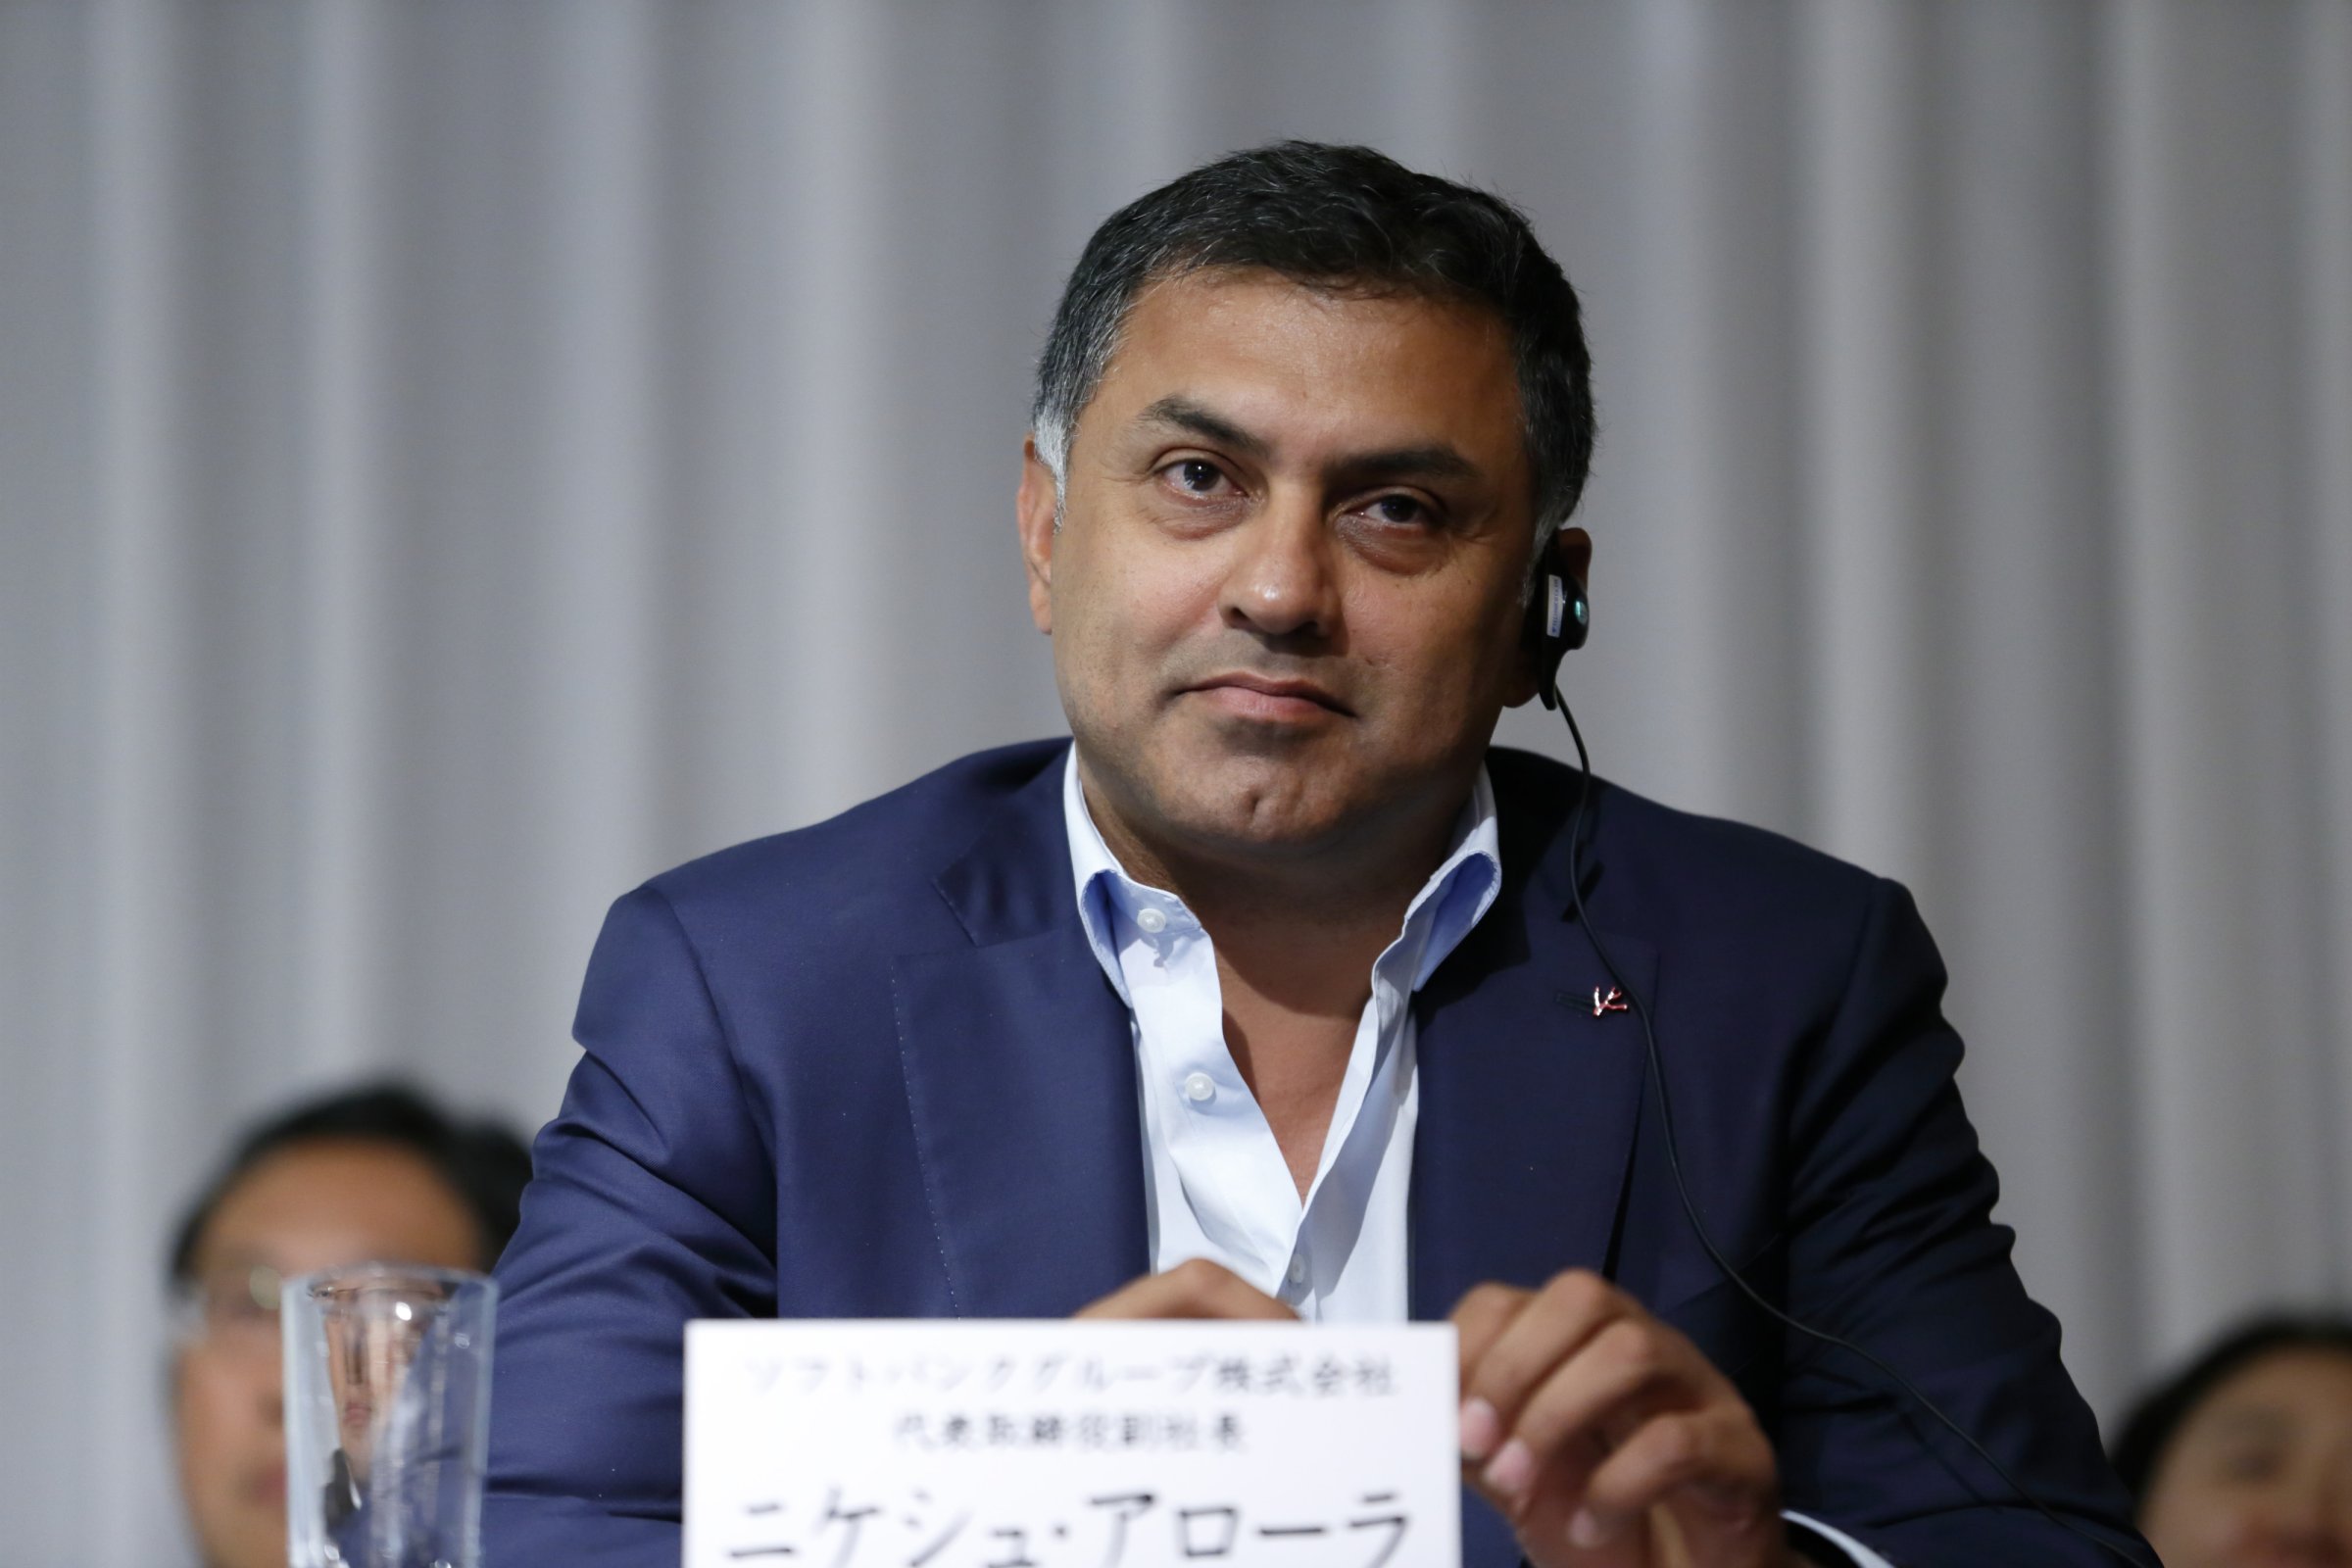 Nikesh Arora, president and chief operating officer of SoftBank Group Corp., looks on during a news conference in Tokyo, Japan, on Tuesday, May 10, 2016.